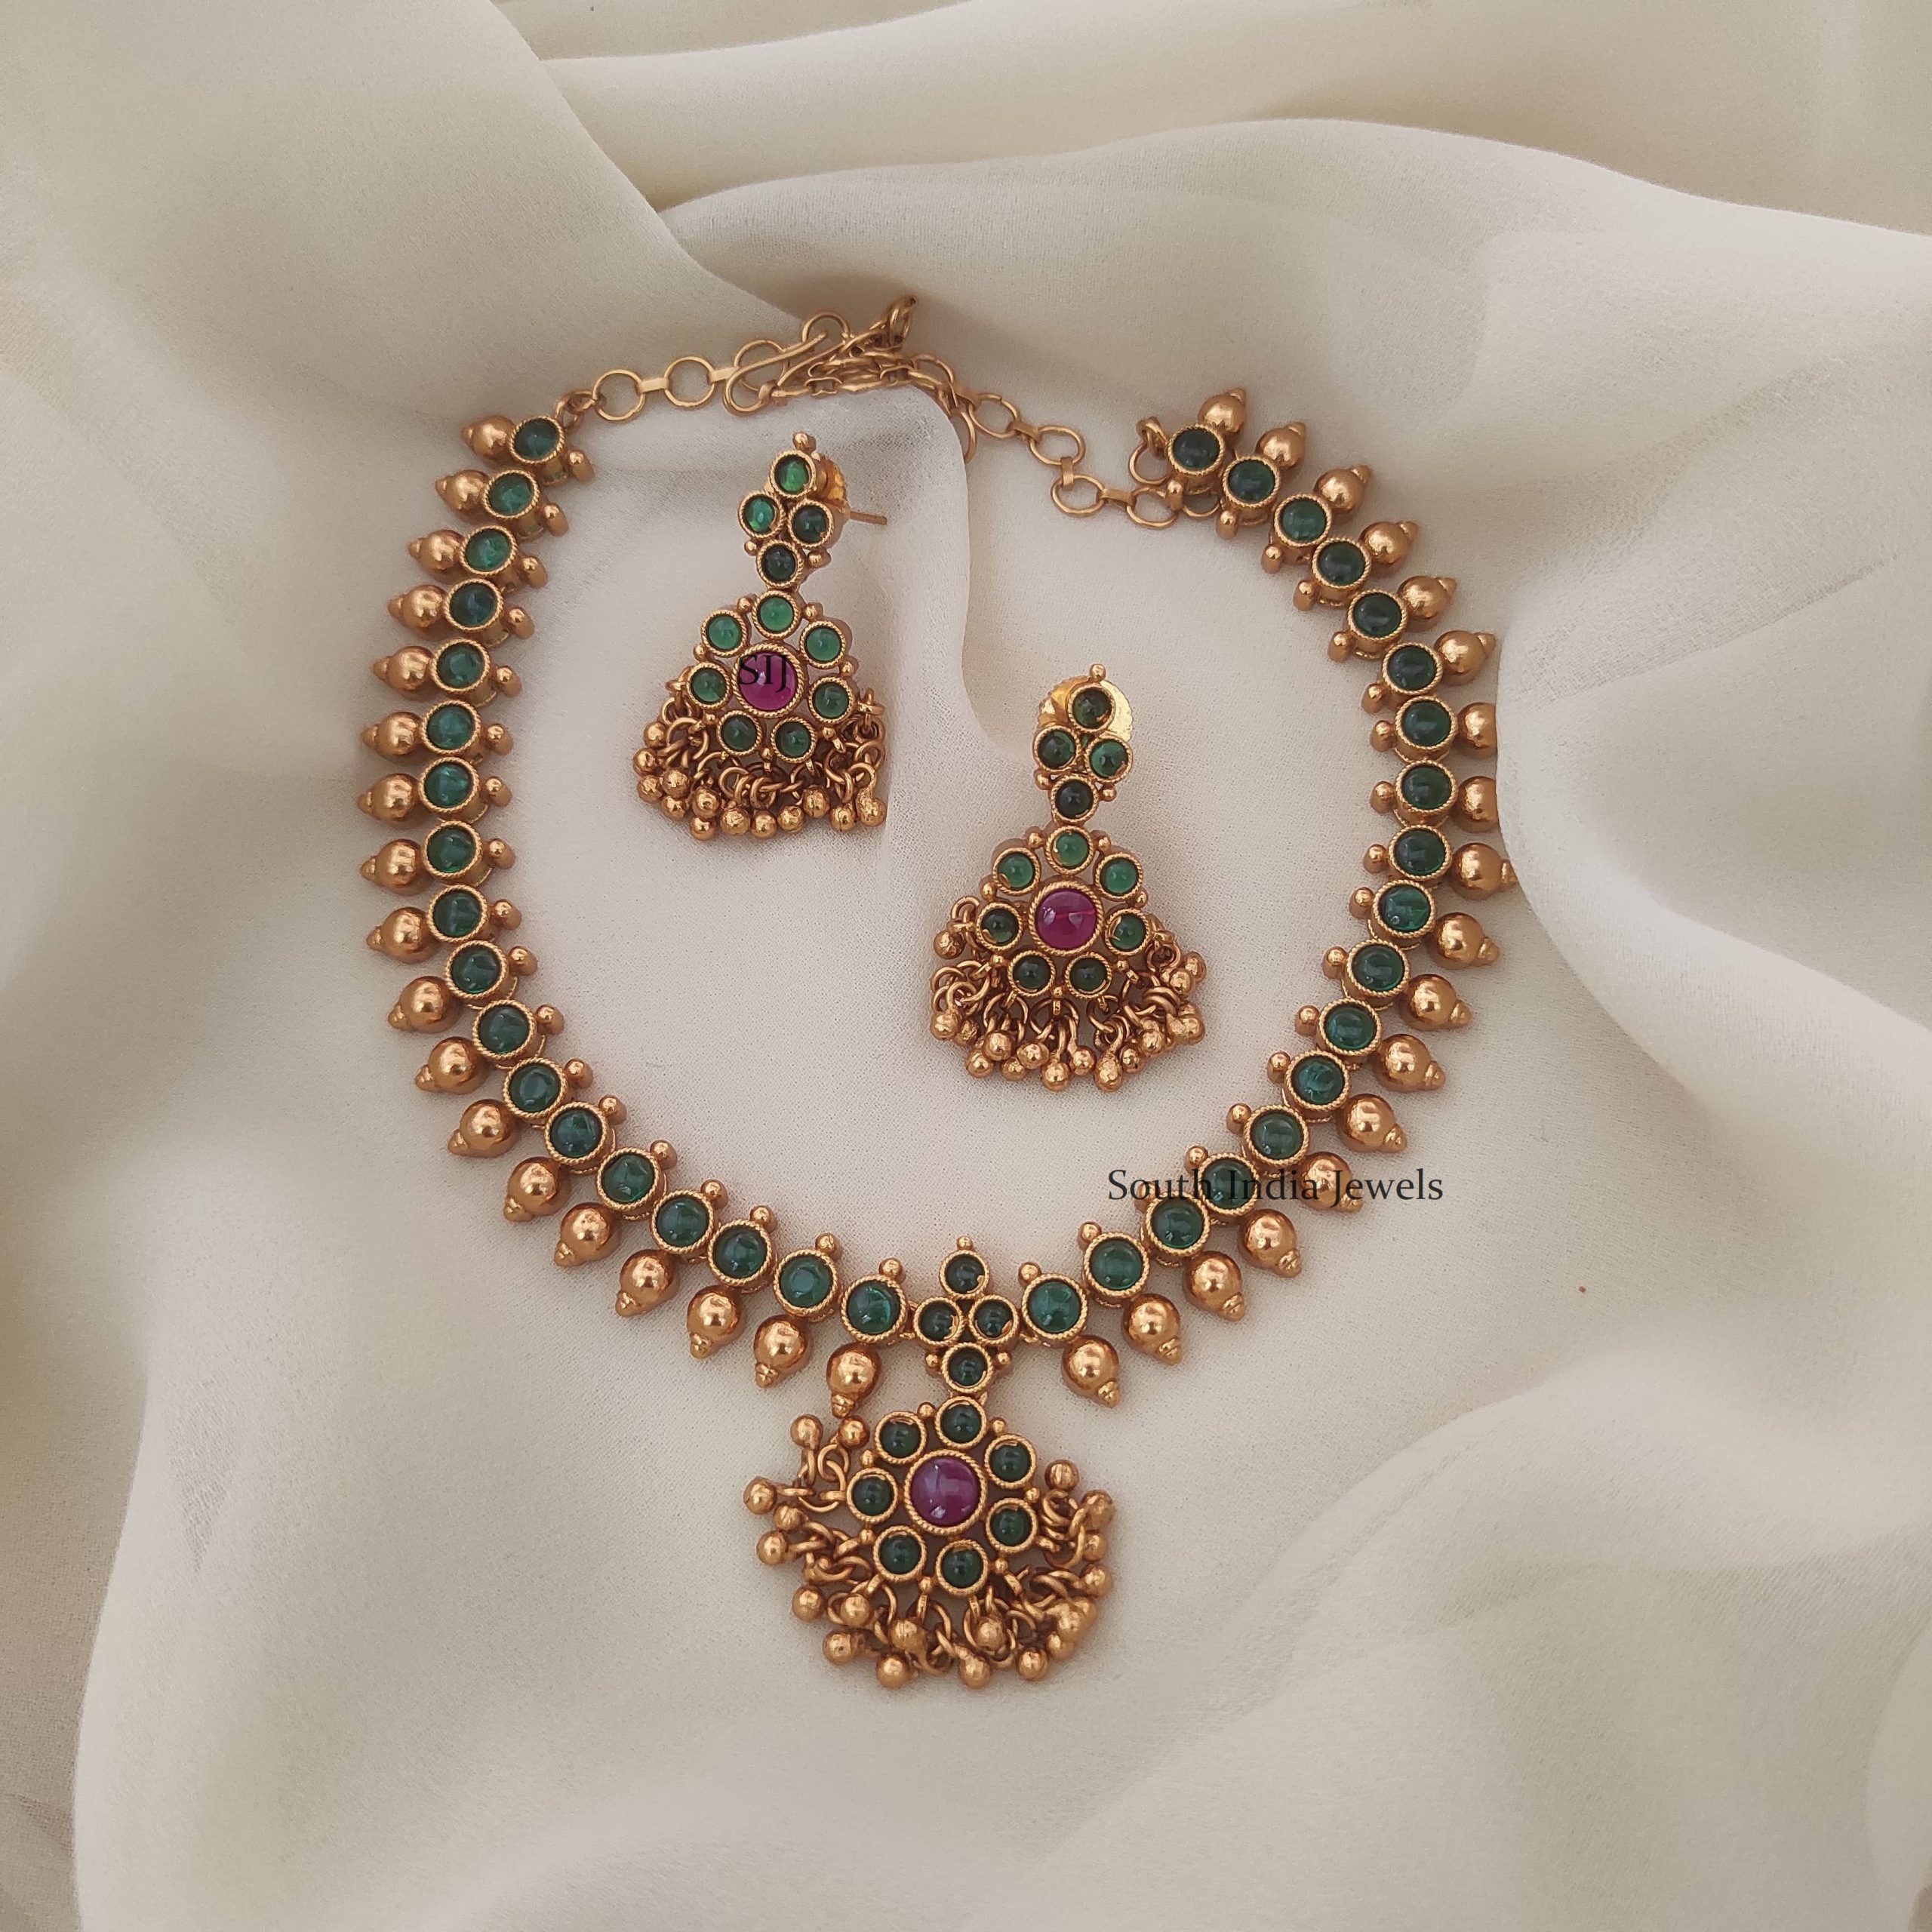 Buy Necklace Sets Online | Premium Quality - South India Jewels